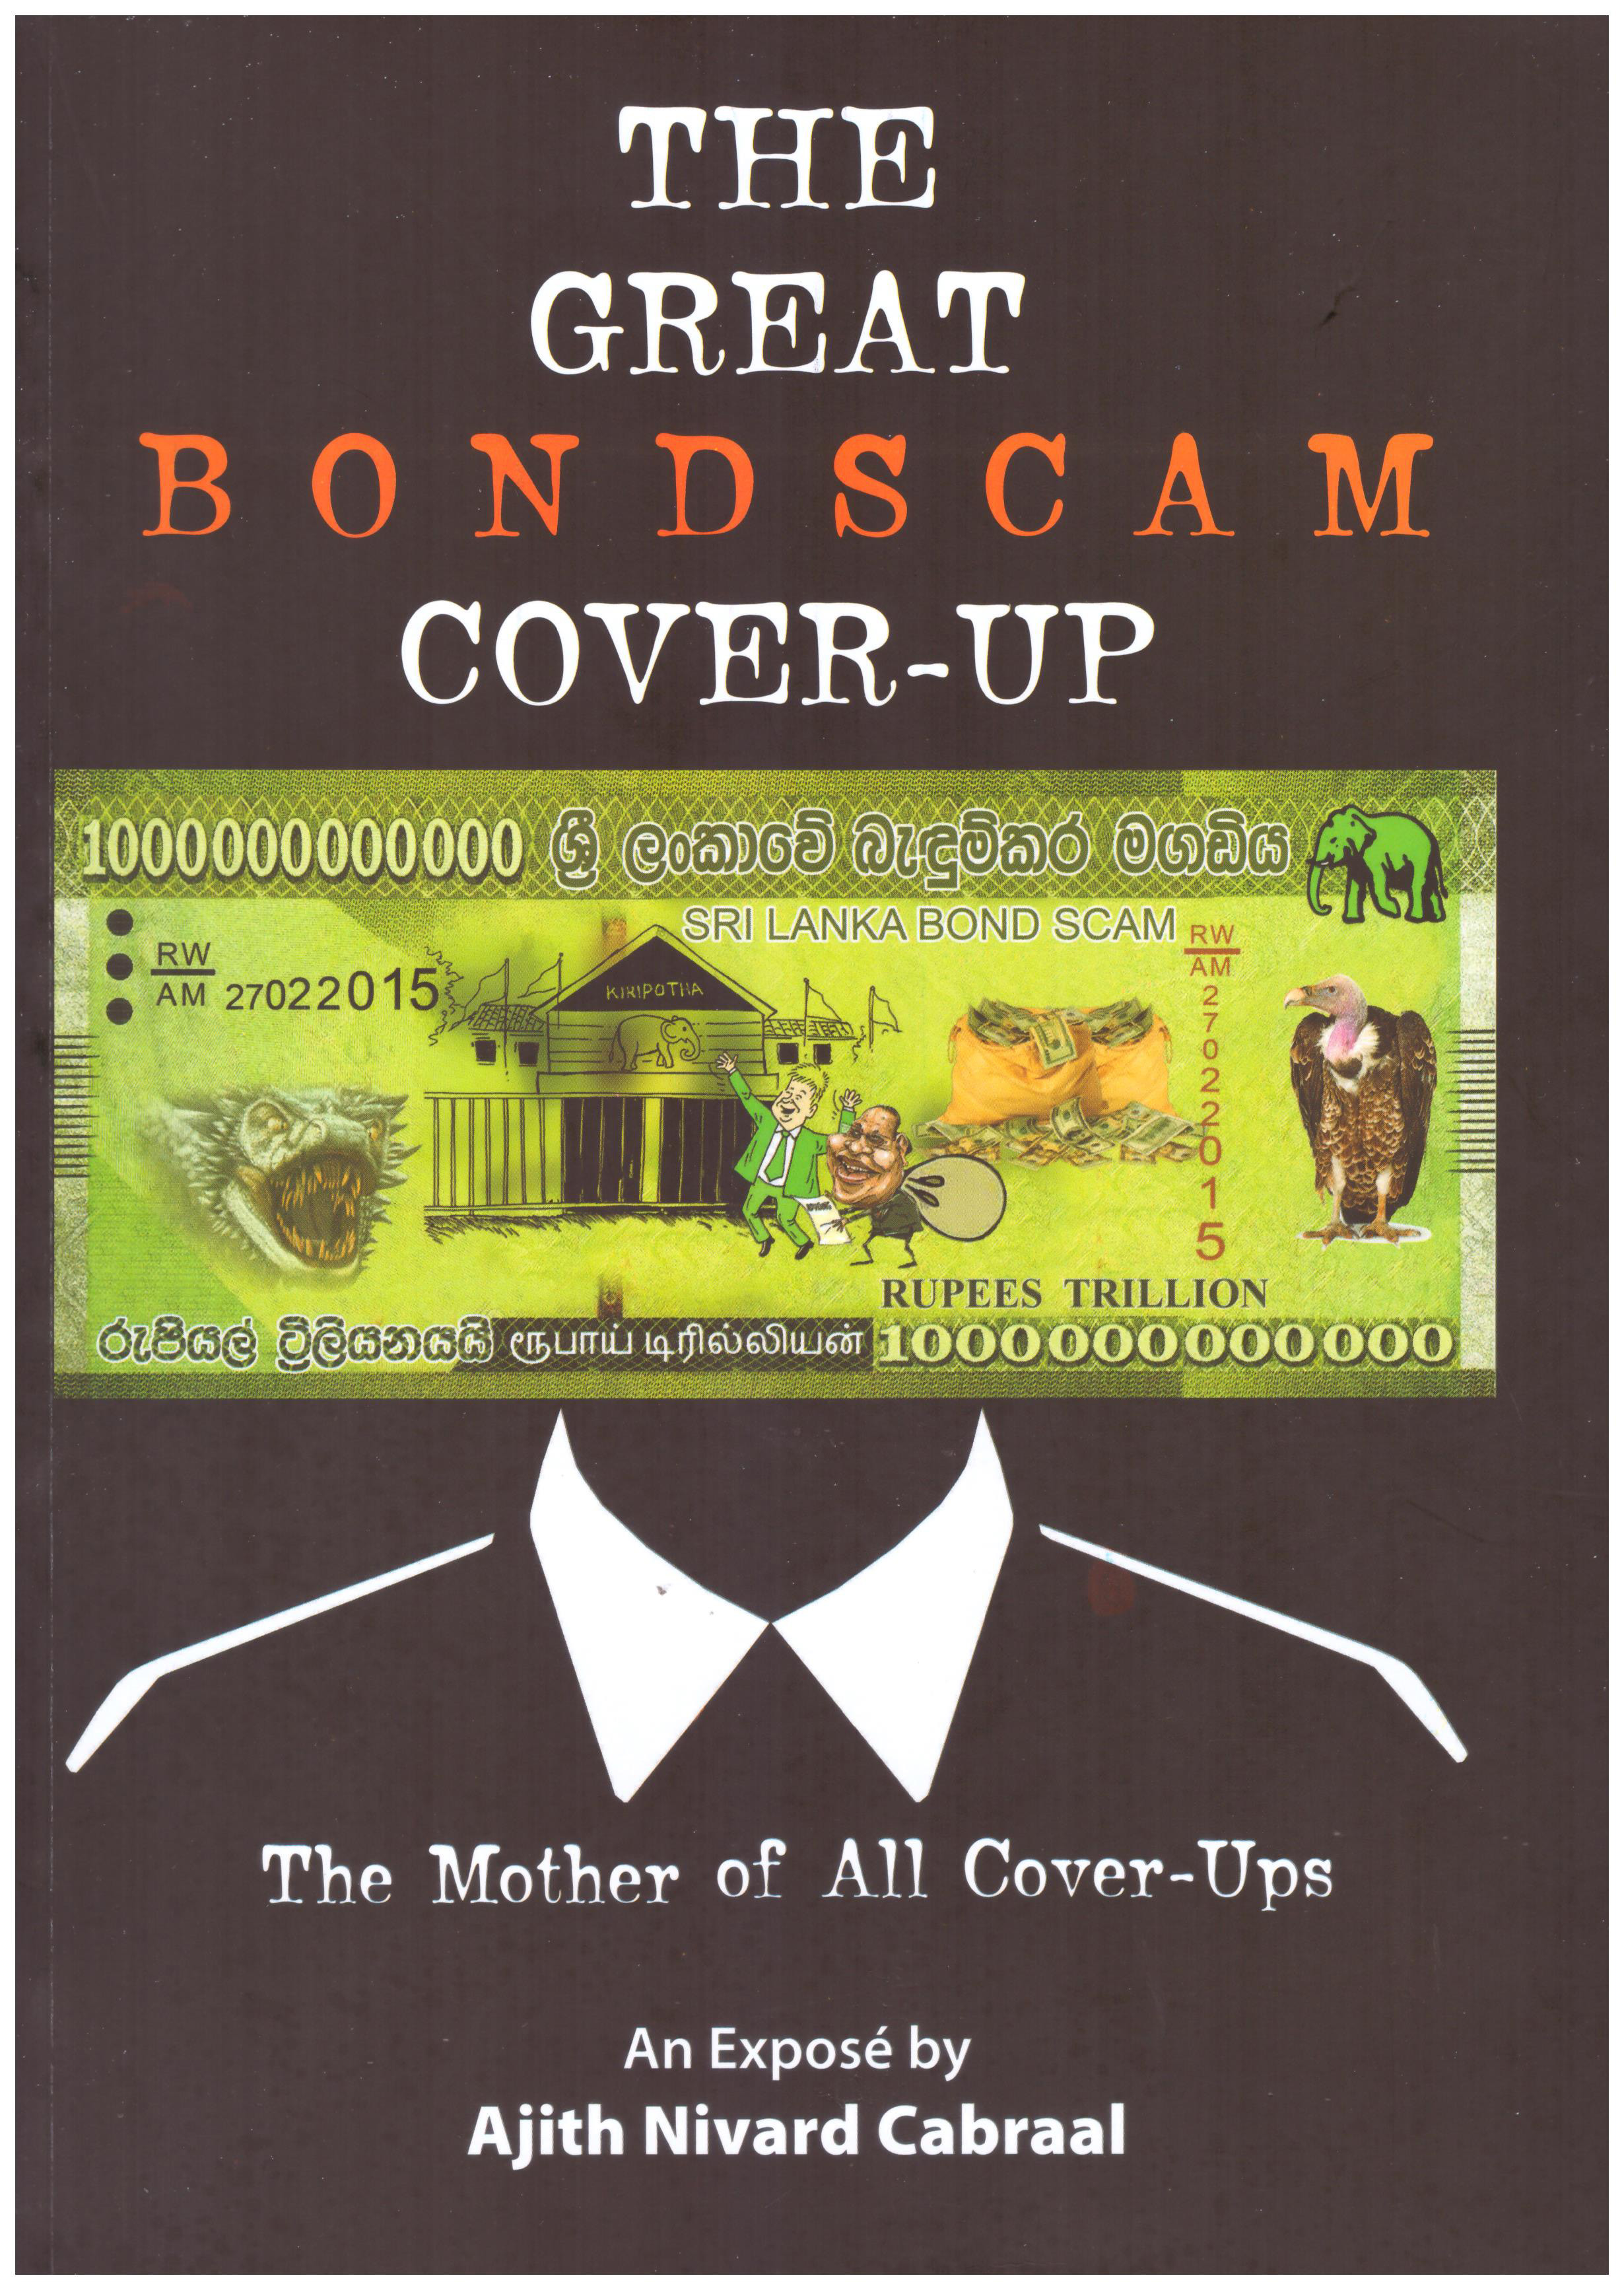 The Great Bondscam Cover-up